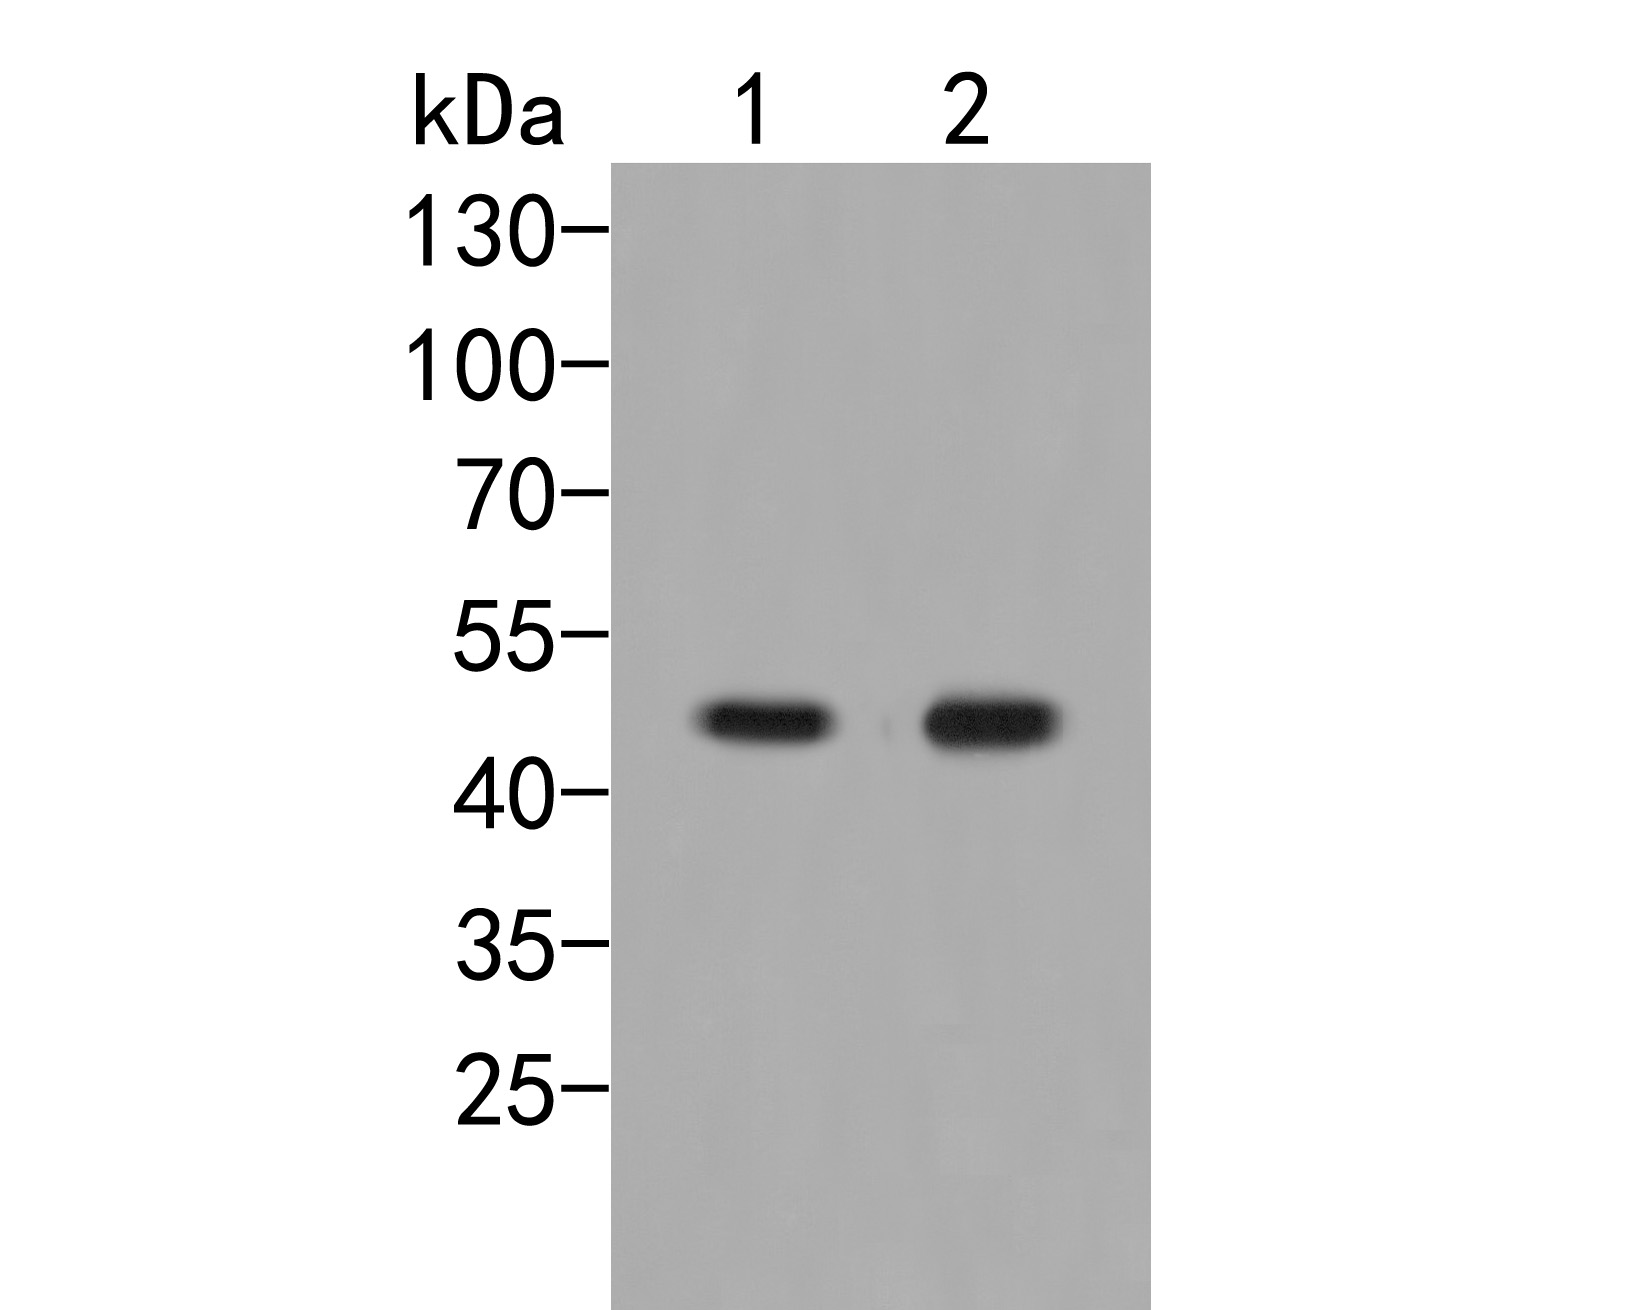 Western blot analysis of EEF1G on different lysates. Proteins were transferred to a PVDF membrane and blocked with 5% NFDM/TBST for 1 hour at room temperature. The primary antibody (HA500258, 1/500) was used in 5% NFDM/TBST at room temperature for 2 hours. Goat Anti-Rabbit IgG - HRP Secondary Antibody (HA1001) at 1:20,000 dilution was used for 1 hour at room temperature.<br />
Positive control: <br />
Lane 1: Daudi cell lysate<br />
Lane 2: NIH/3T3 cell lysate